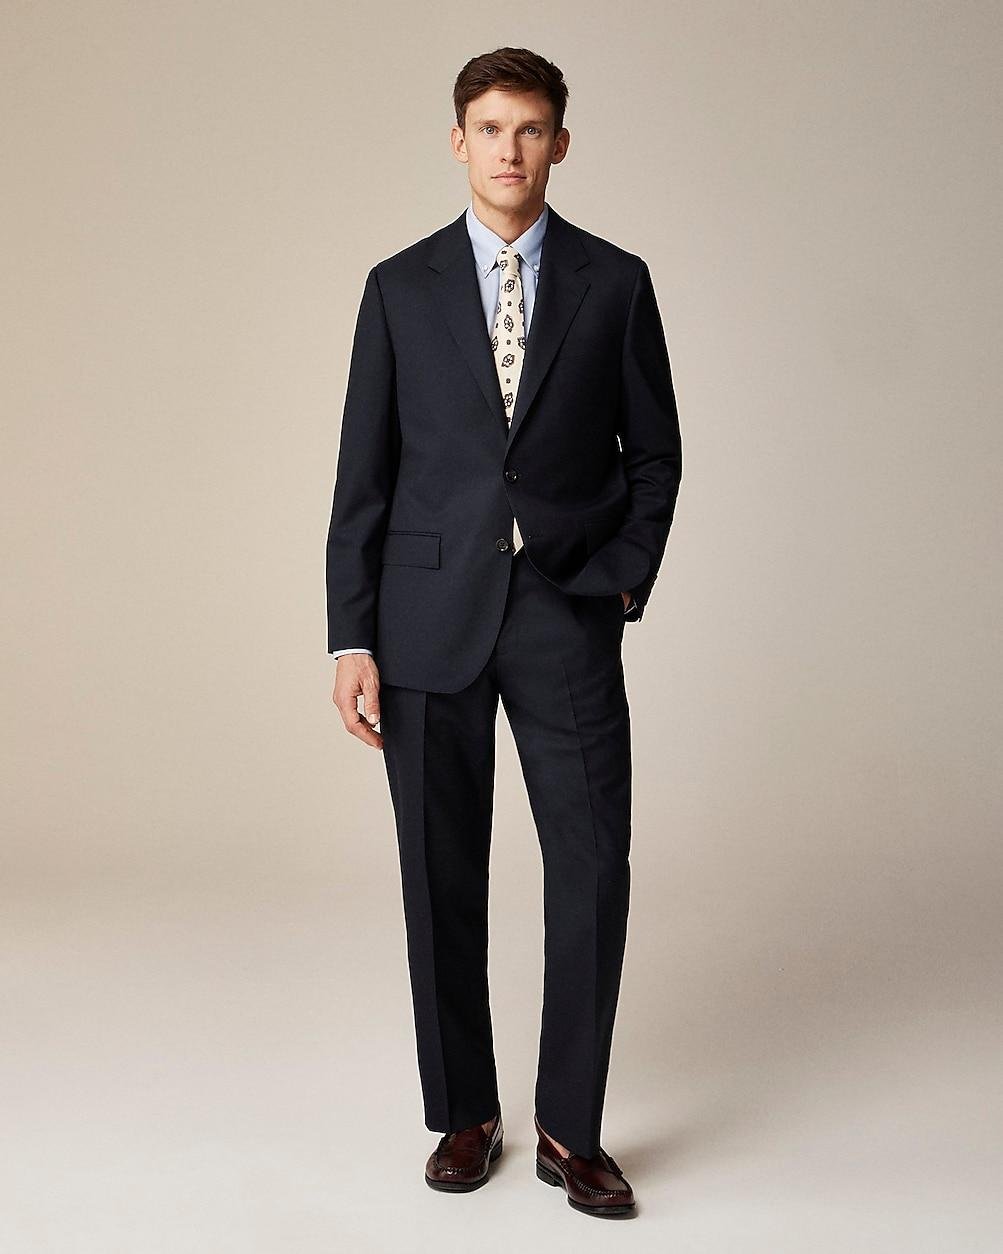 Kenmare Relaxed-fit suit jacket in Italian wool by J.CREW